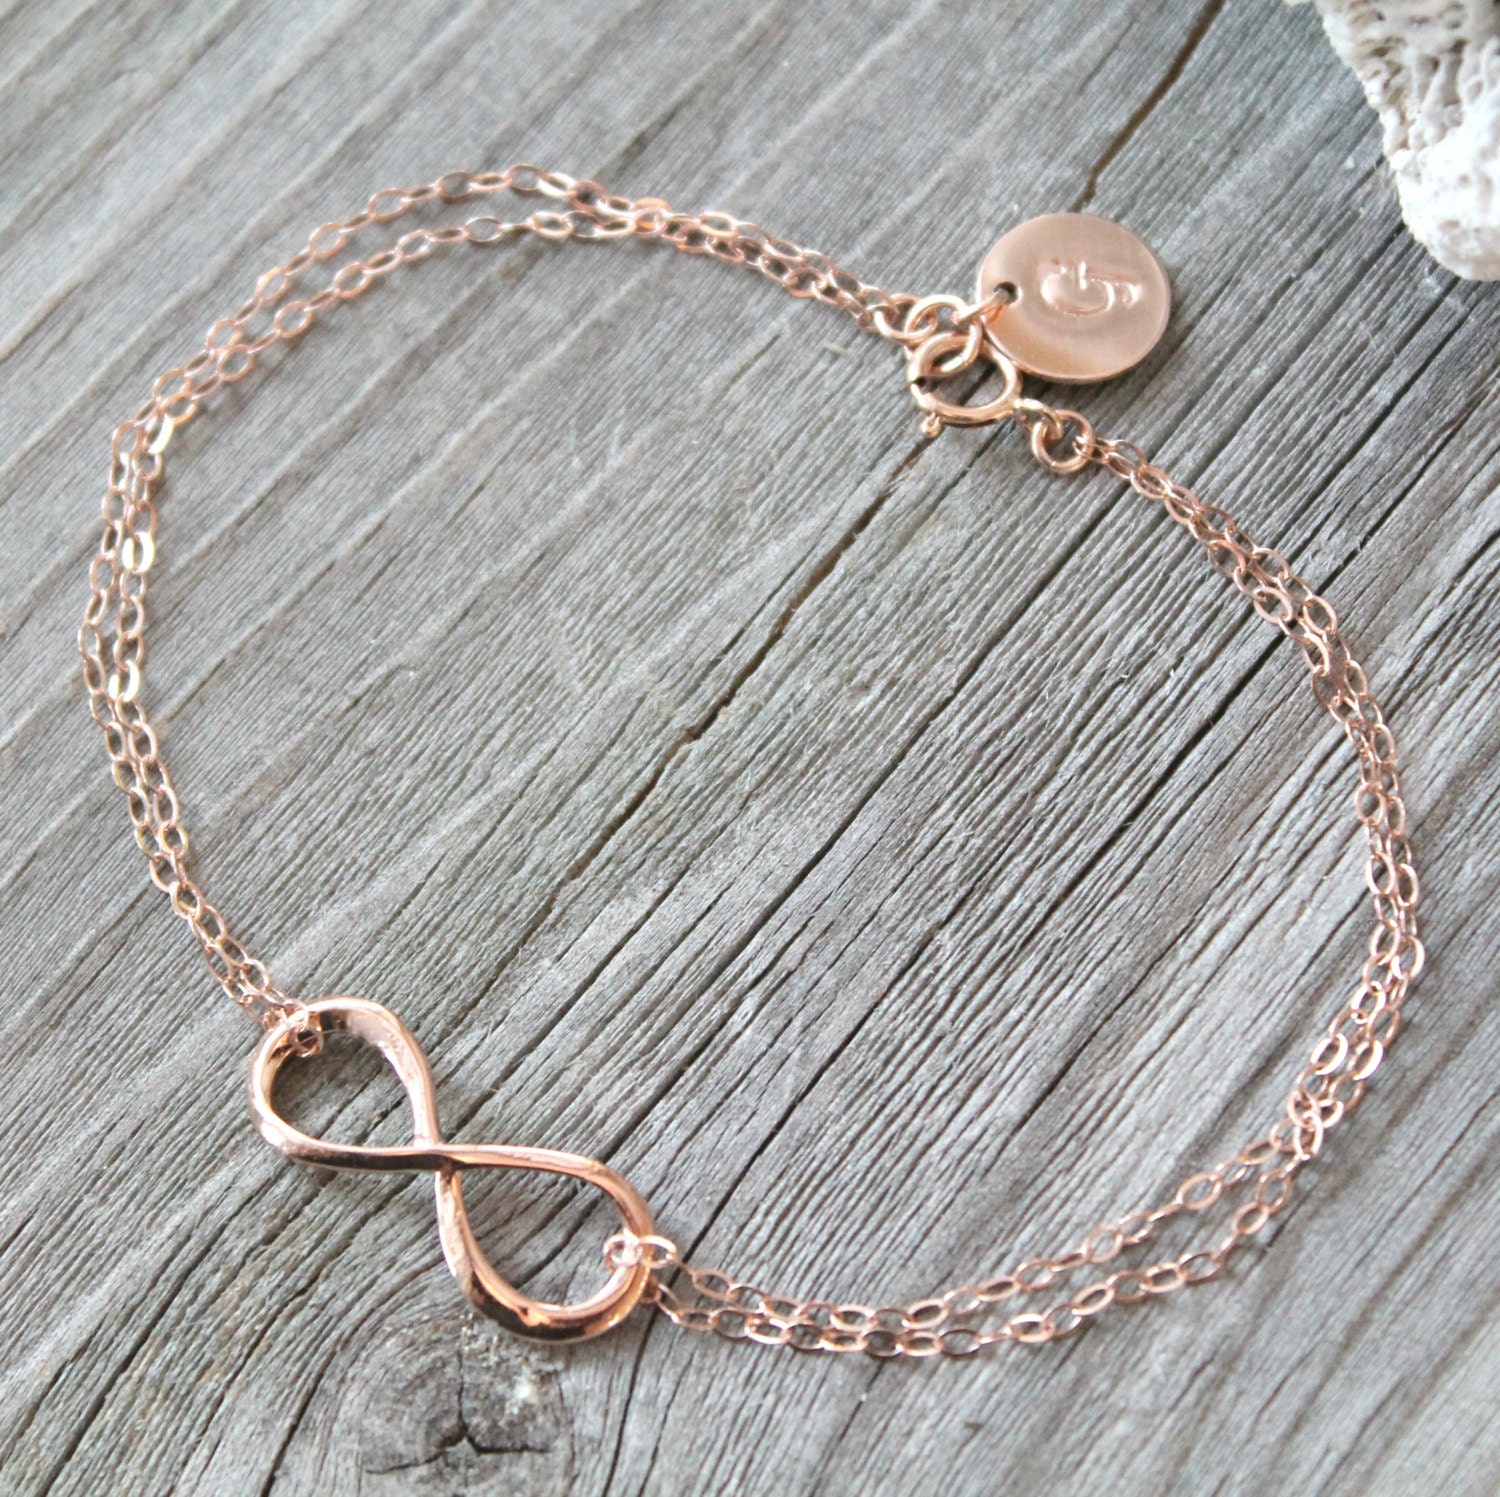 Personalized 14k Rose gold filled Infinity bracelet with